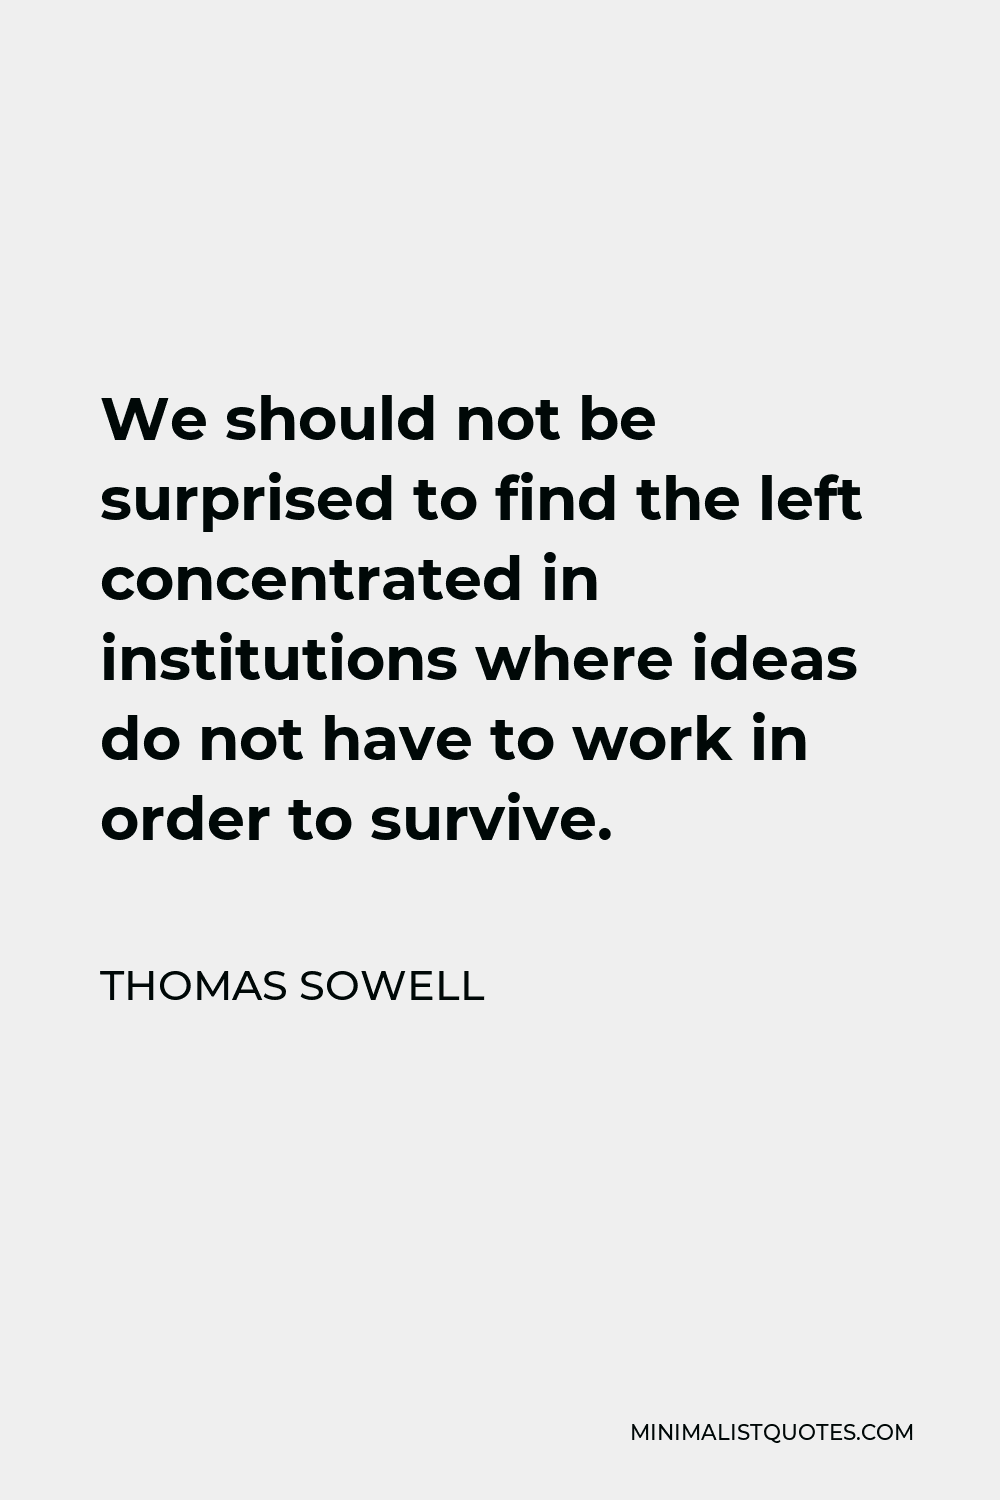 Thomas Sowell Quote - We should not be surprised to find the left concentrated in institutions where ideas do not have to work in order to survive.